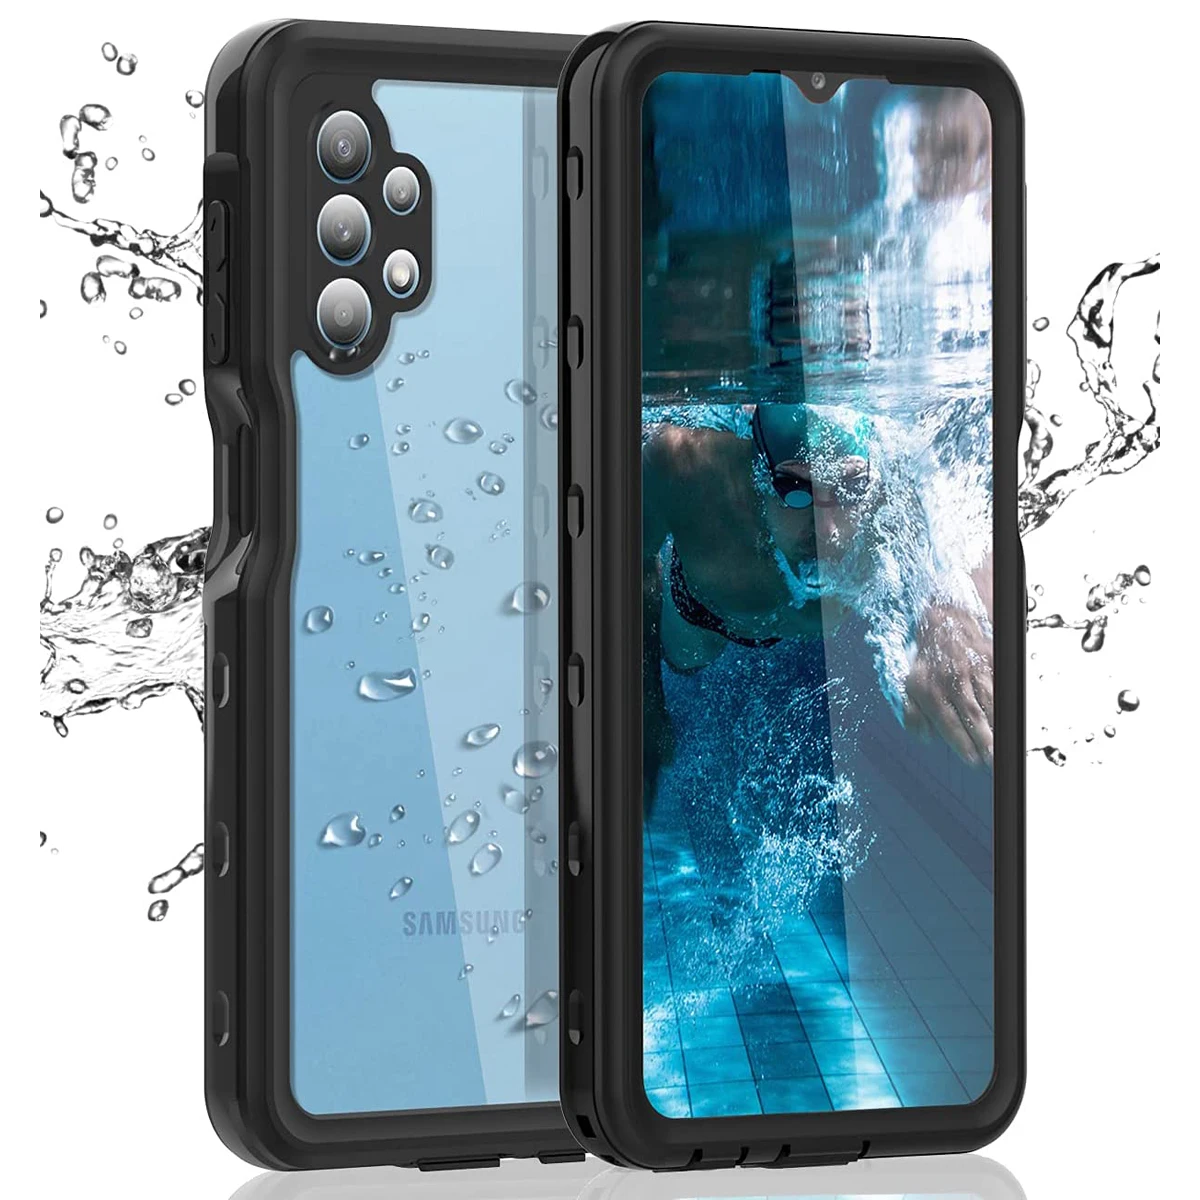 

2M IP68 Waterproof Case for Galaxy A32 A12 A52 A72 5G Shockproof Outdoor Diving Case Cover For Galaxy A01 A21 A11 US A10E